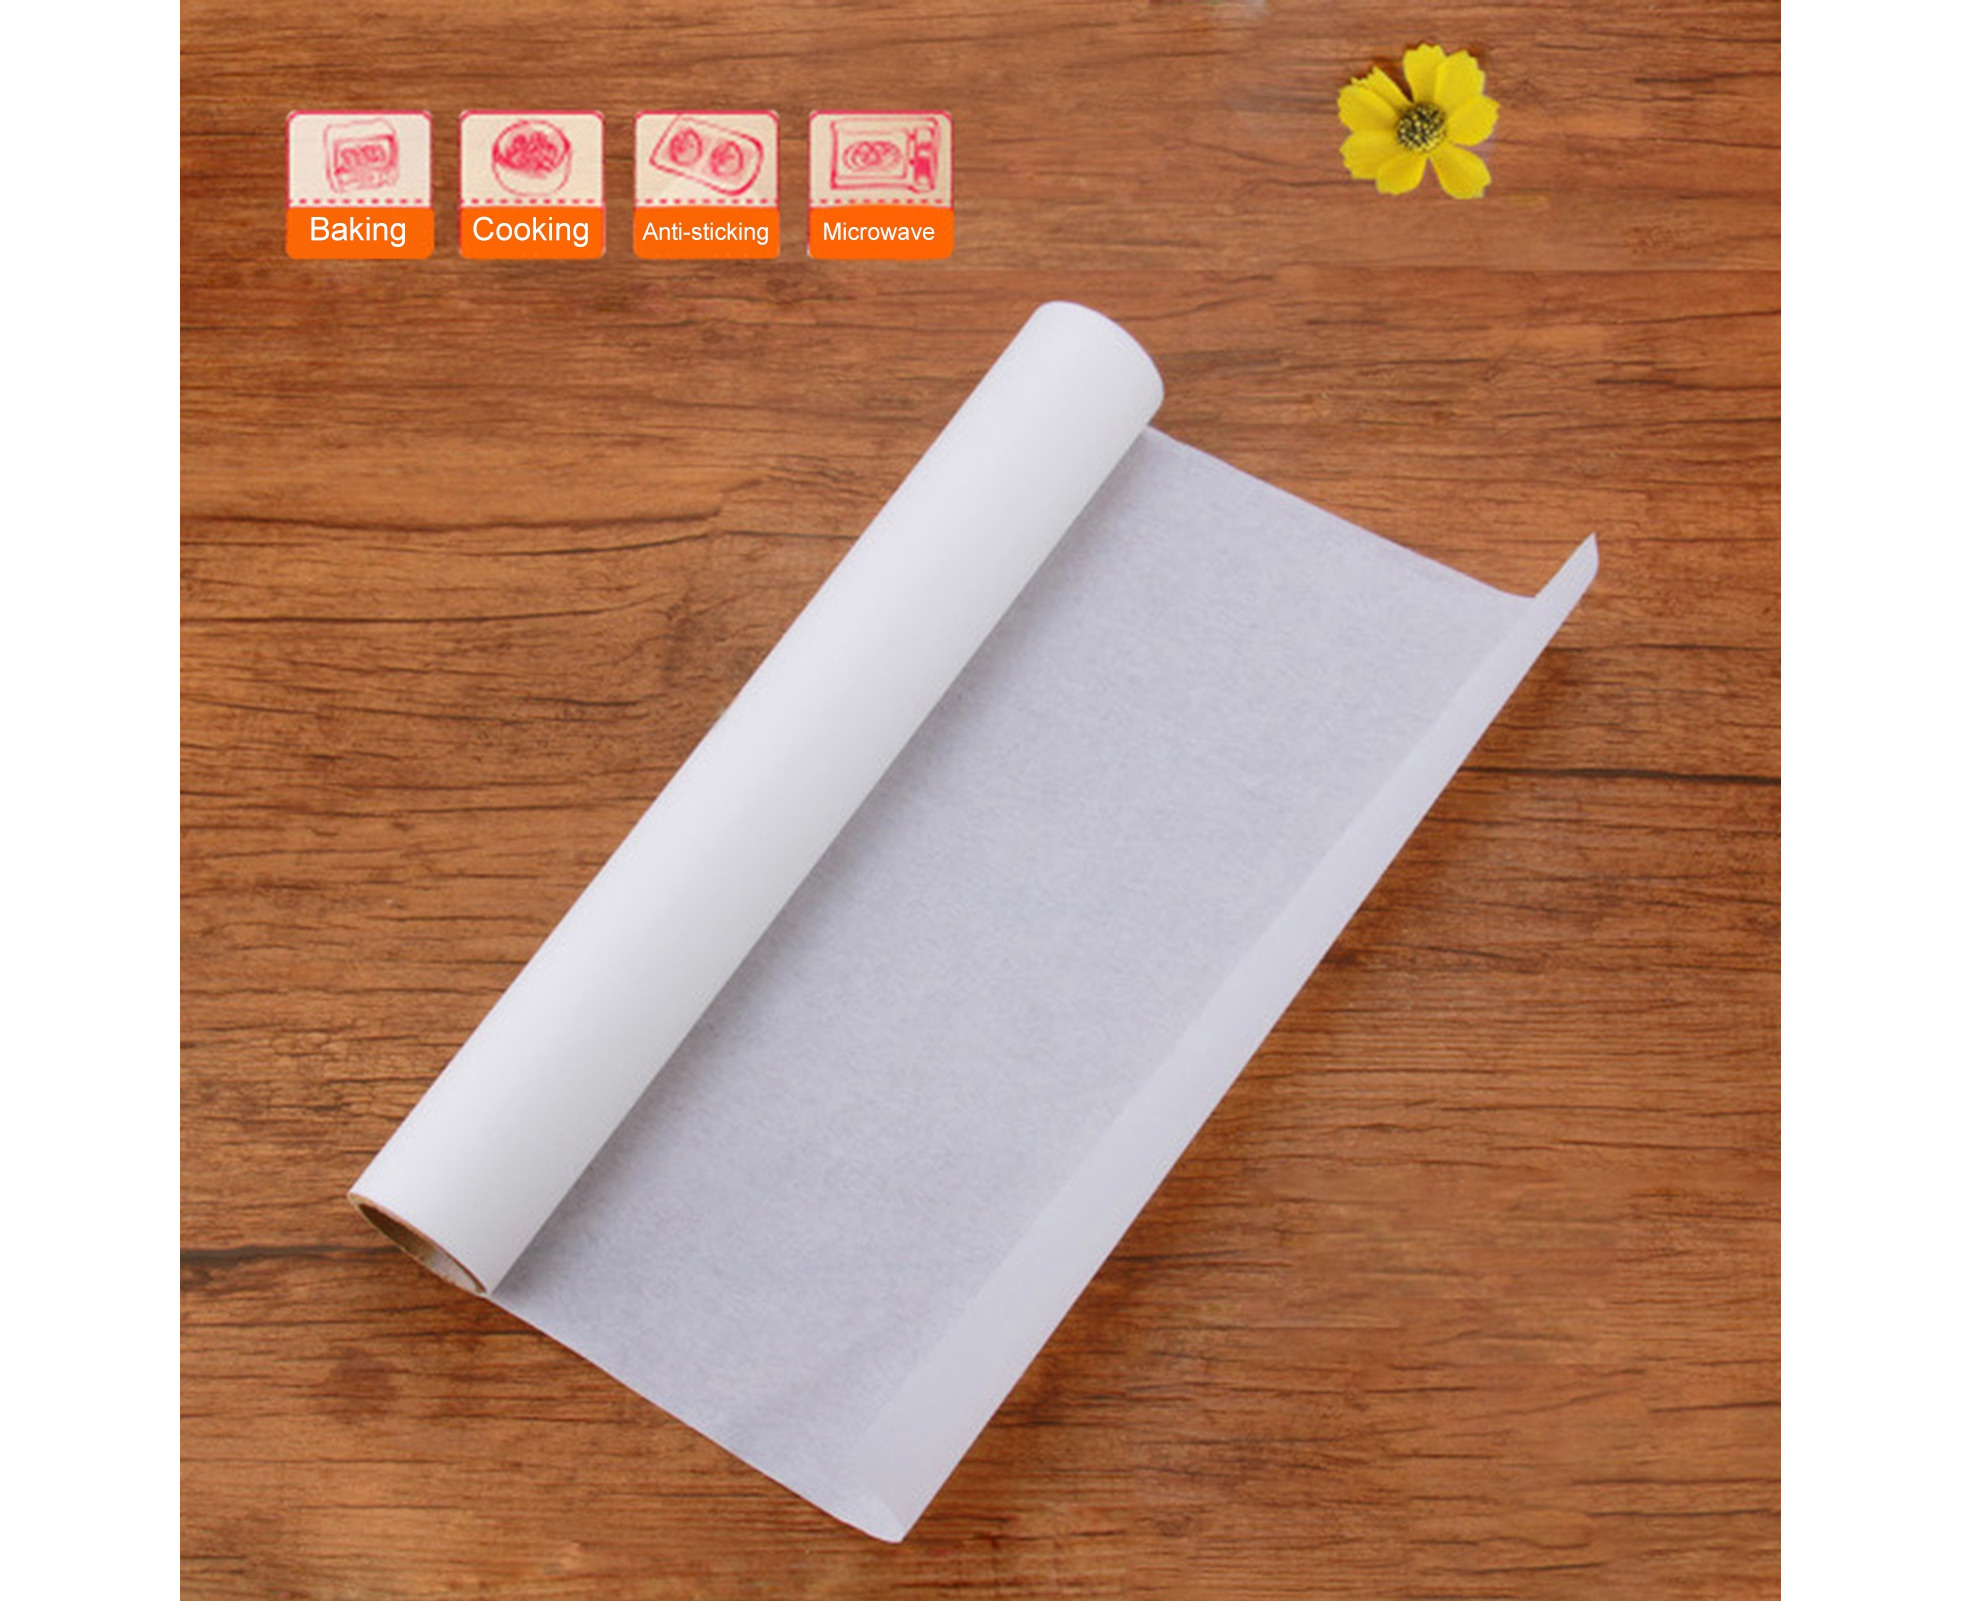 Cooking Grilling High Temperature Resistant Brown, 2 PCS Waterproof And Greaseproof Baking Paper Non-Stick Roll For Baking Parchment Paper For Baking 